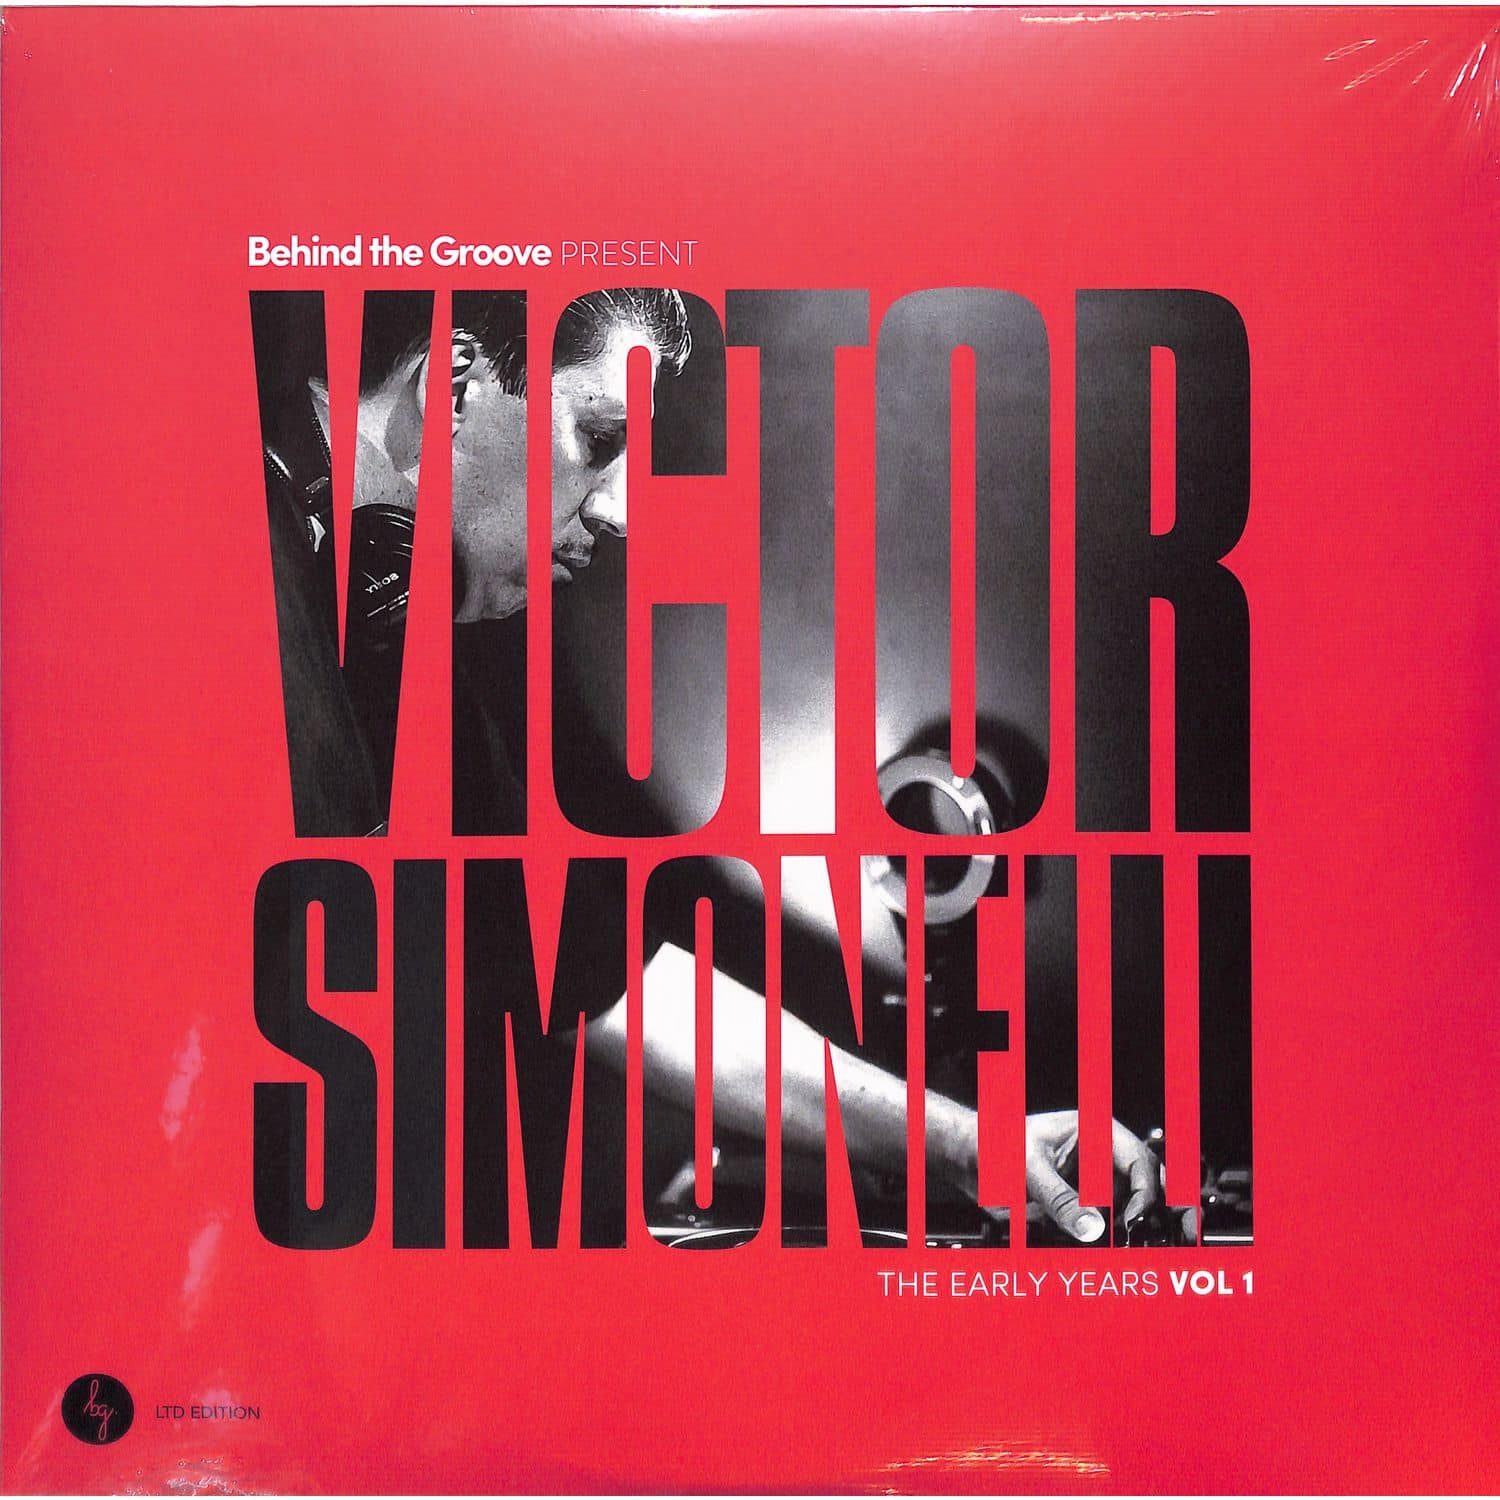 Victor Simonelli - BEHIND THE GROOVE PRESENT VICTOR SIMONELLI THE EARLY YEARS VOL 1 